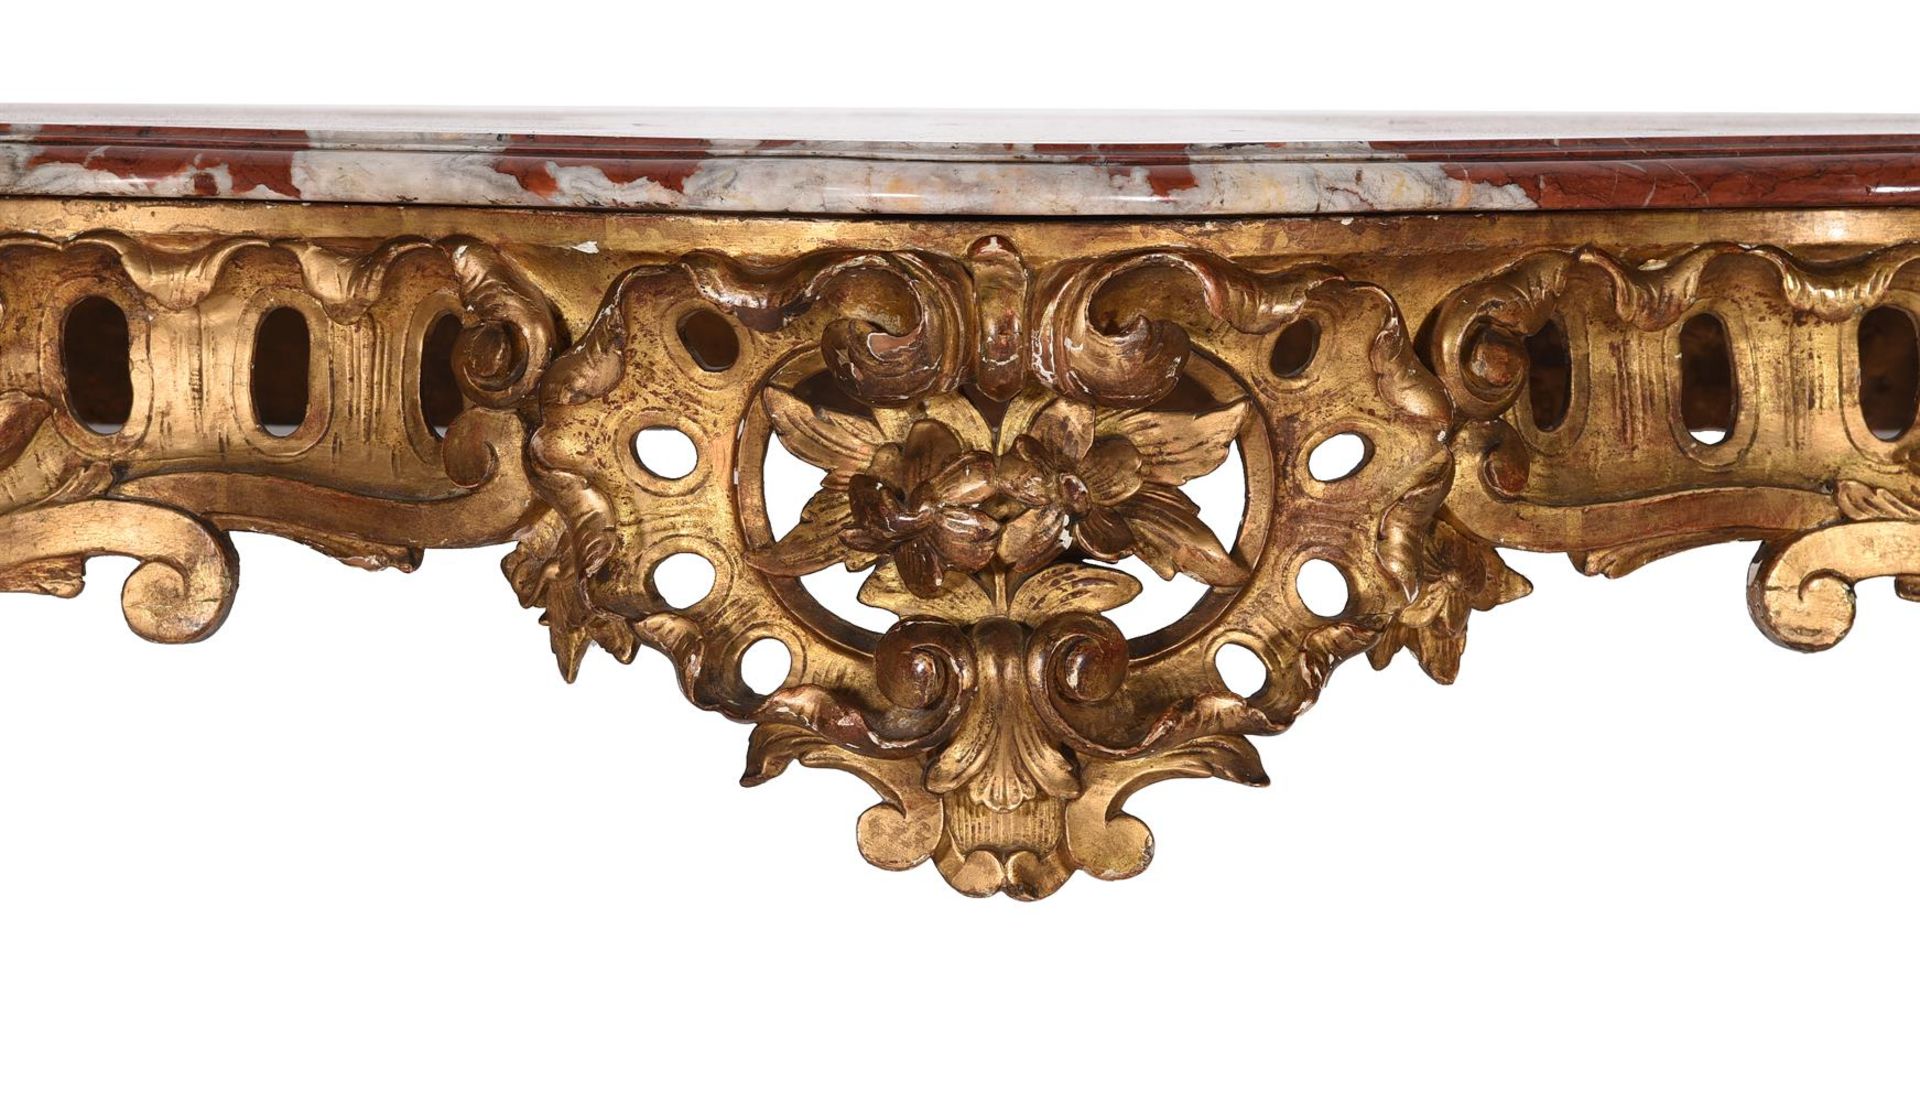 A FRENCH CARVED GILTWOOD CONSOLE TABLE, IN LOUIS XV STYLE, MID 19TH CENTURY - Image 2 of 5